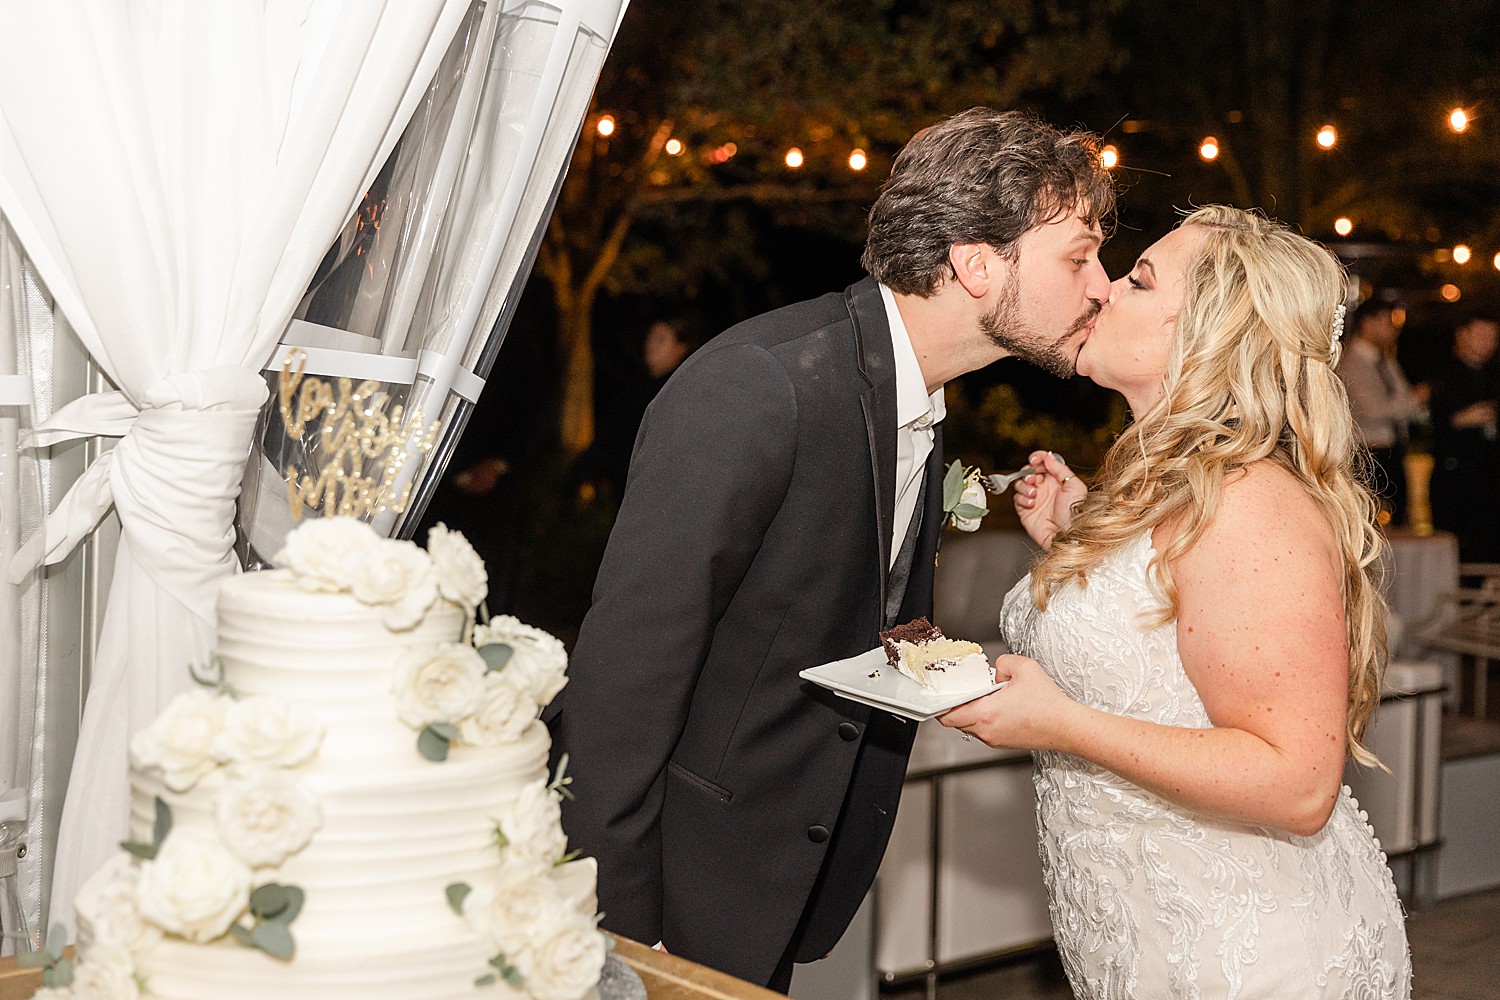 couple kiss after cutting their wedding cake at reception